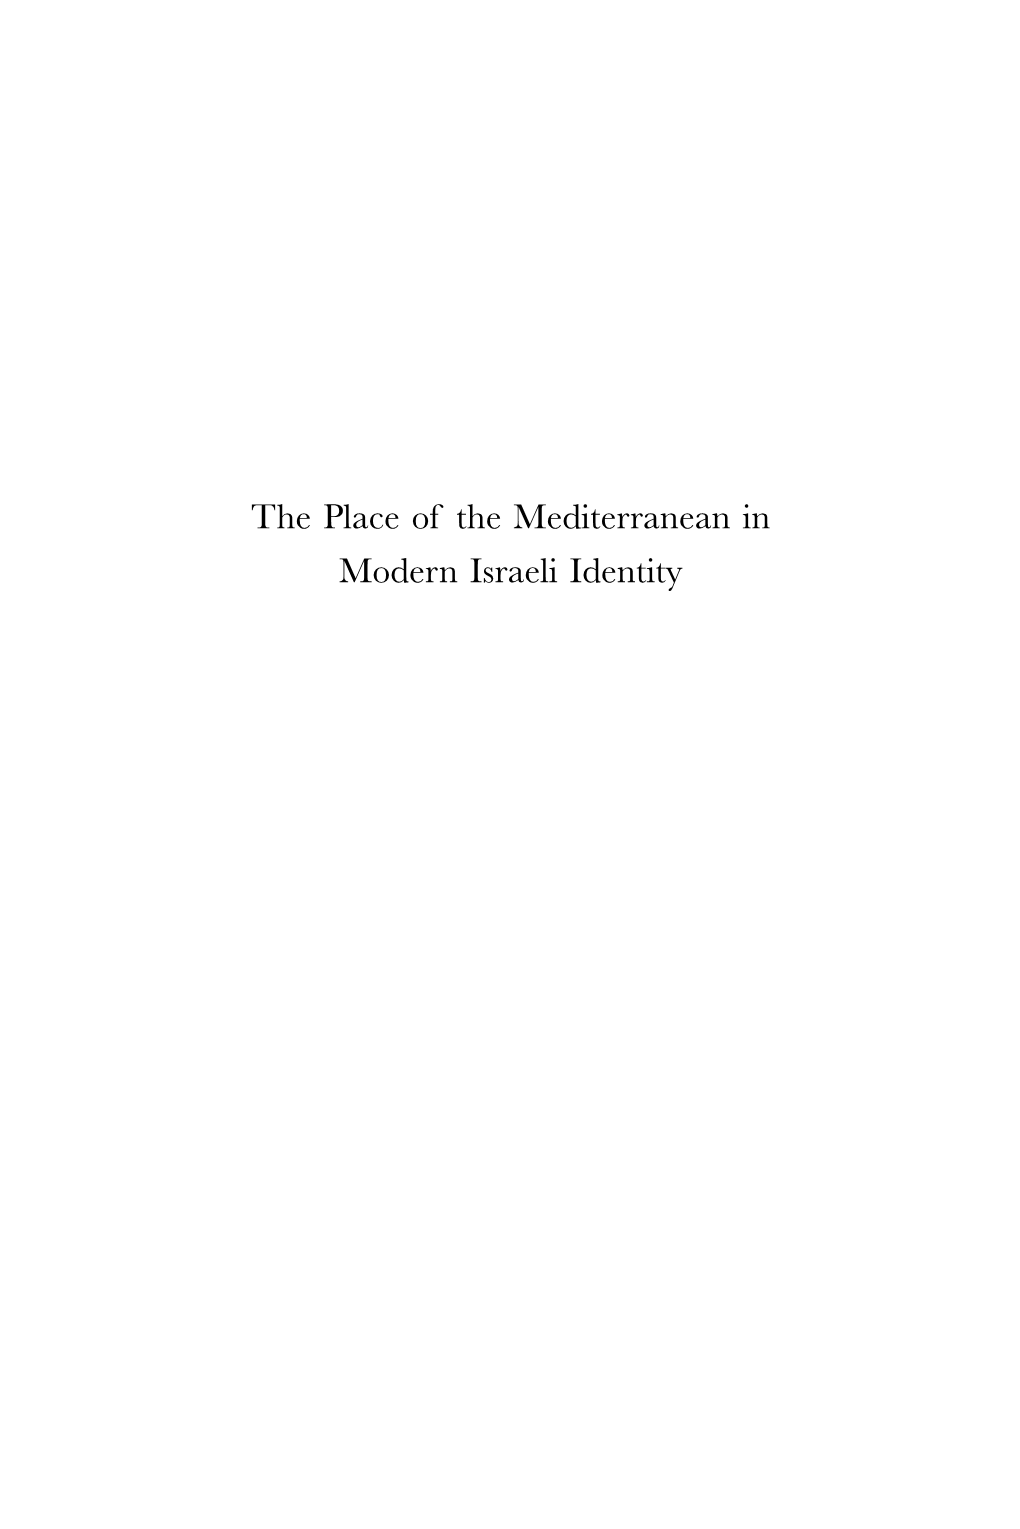 The Place of the Mediterranean in Modern Israeli Identity Jewish Identities in a Changing World